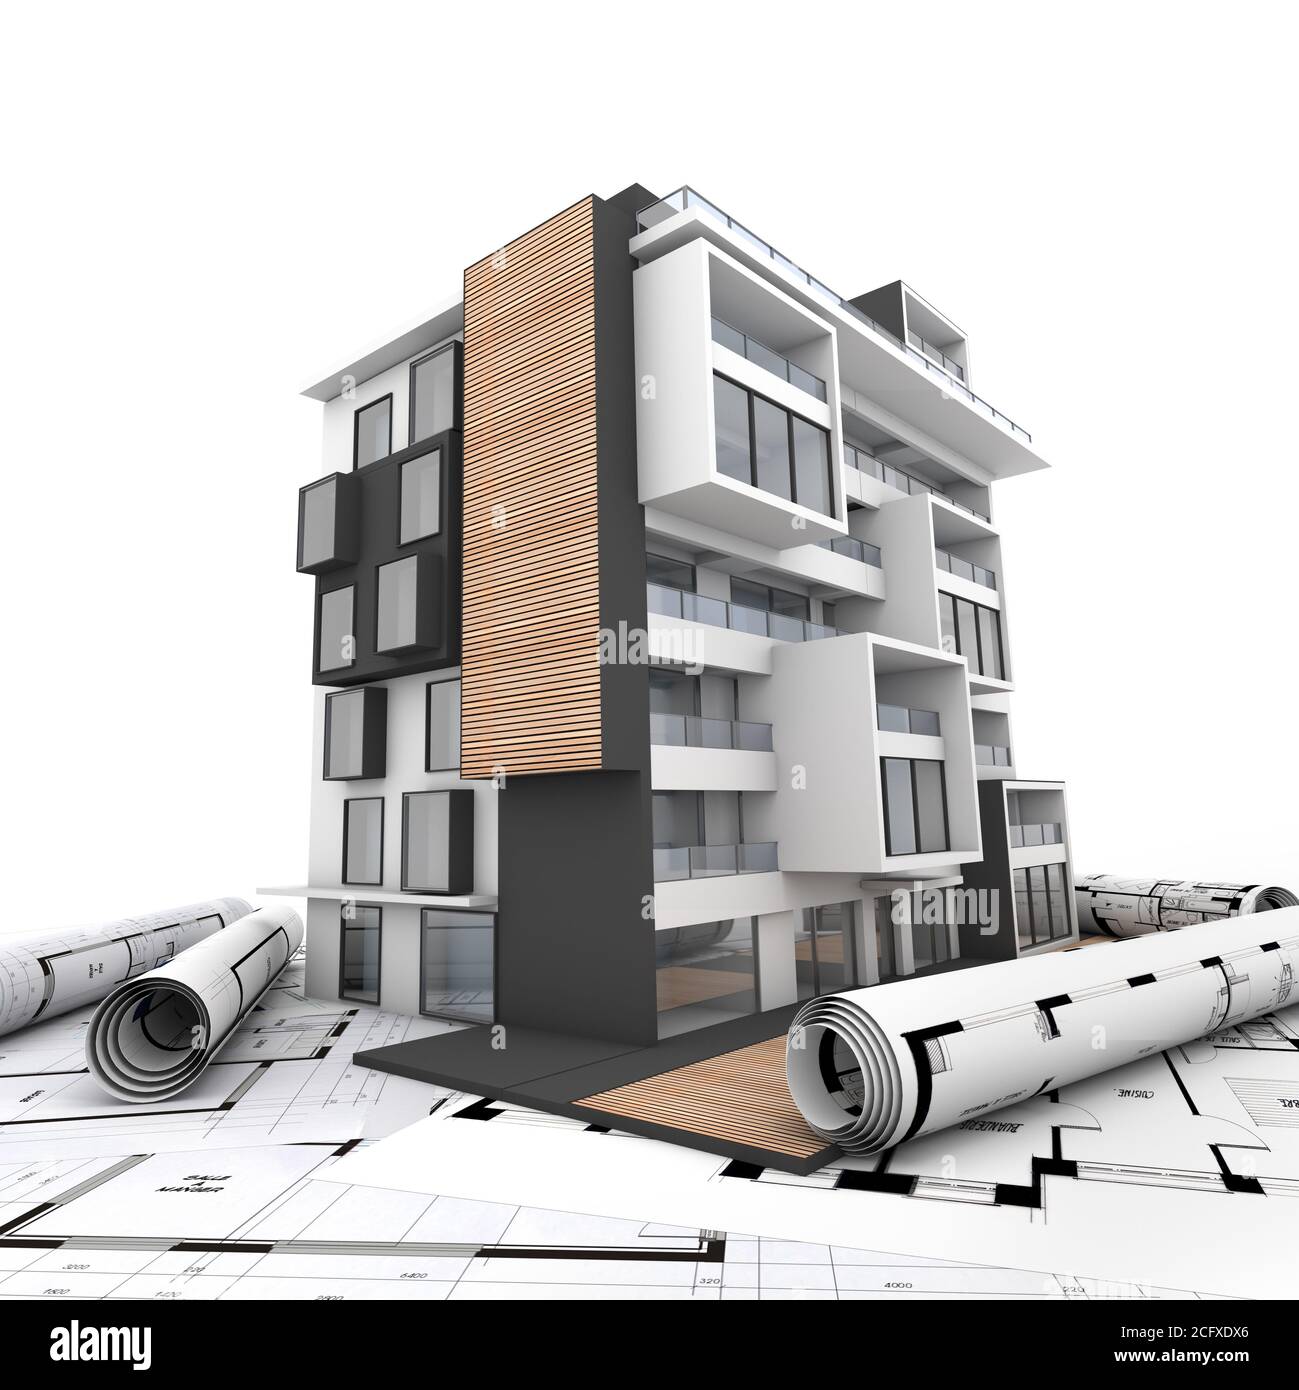 3D rendering of a modern appartment building with garden and blueprints on the background Stock Photo